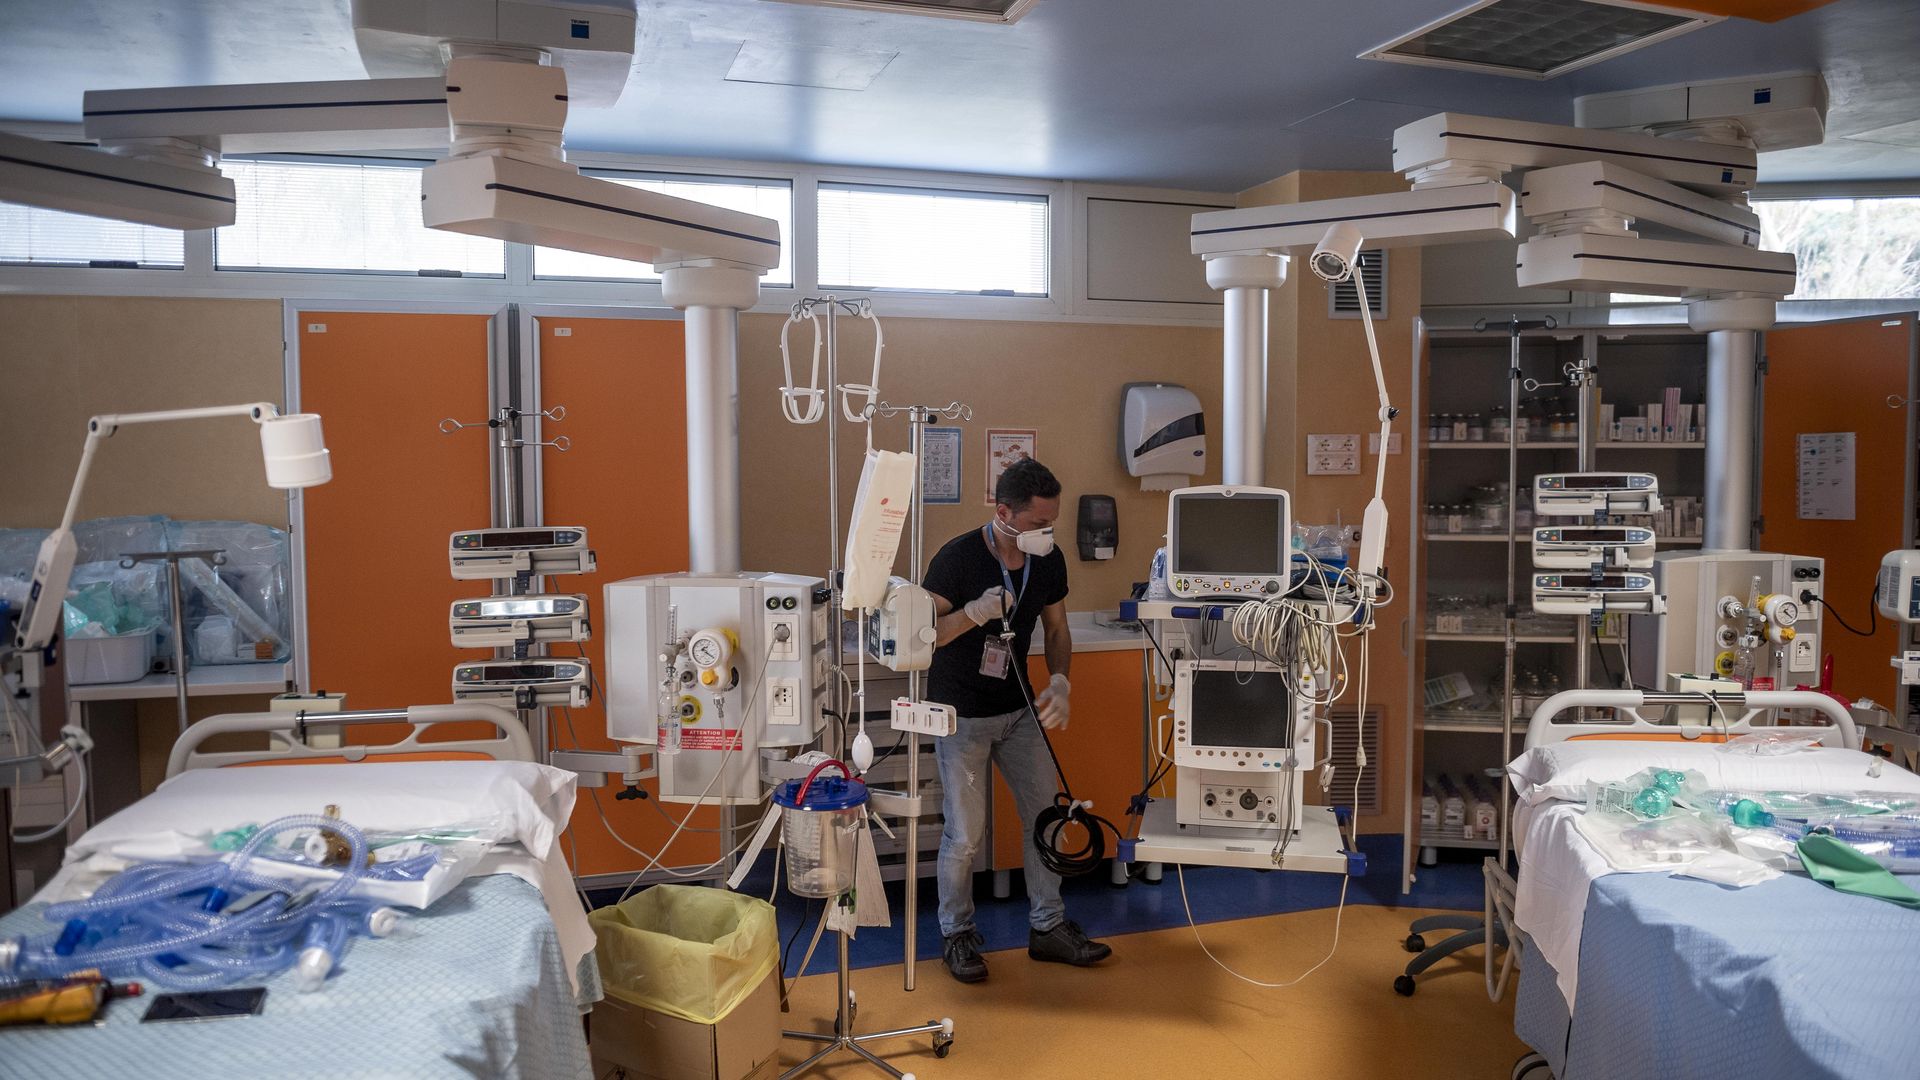 A man prepares an intensive care unit surrounded by beds and other hospital equipment.